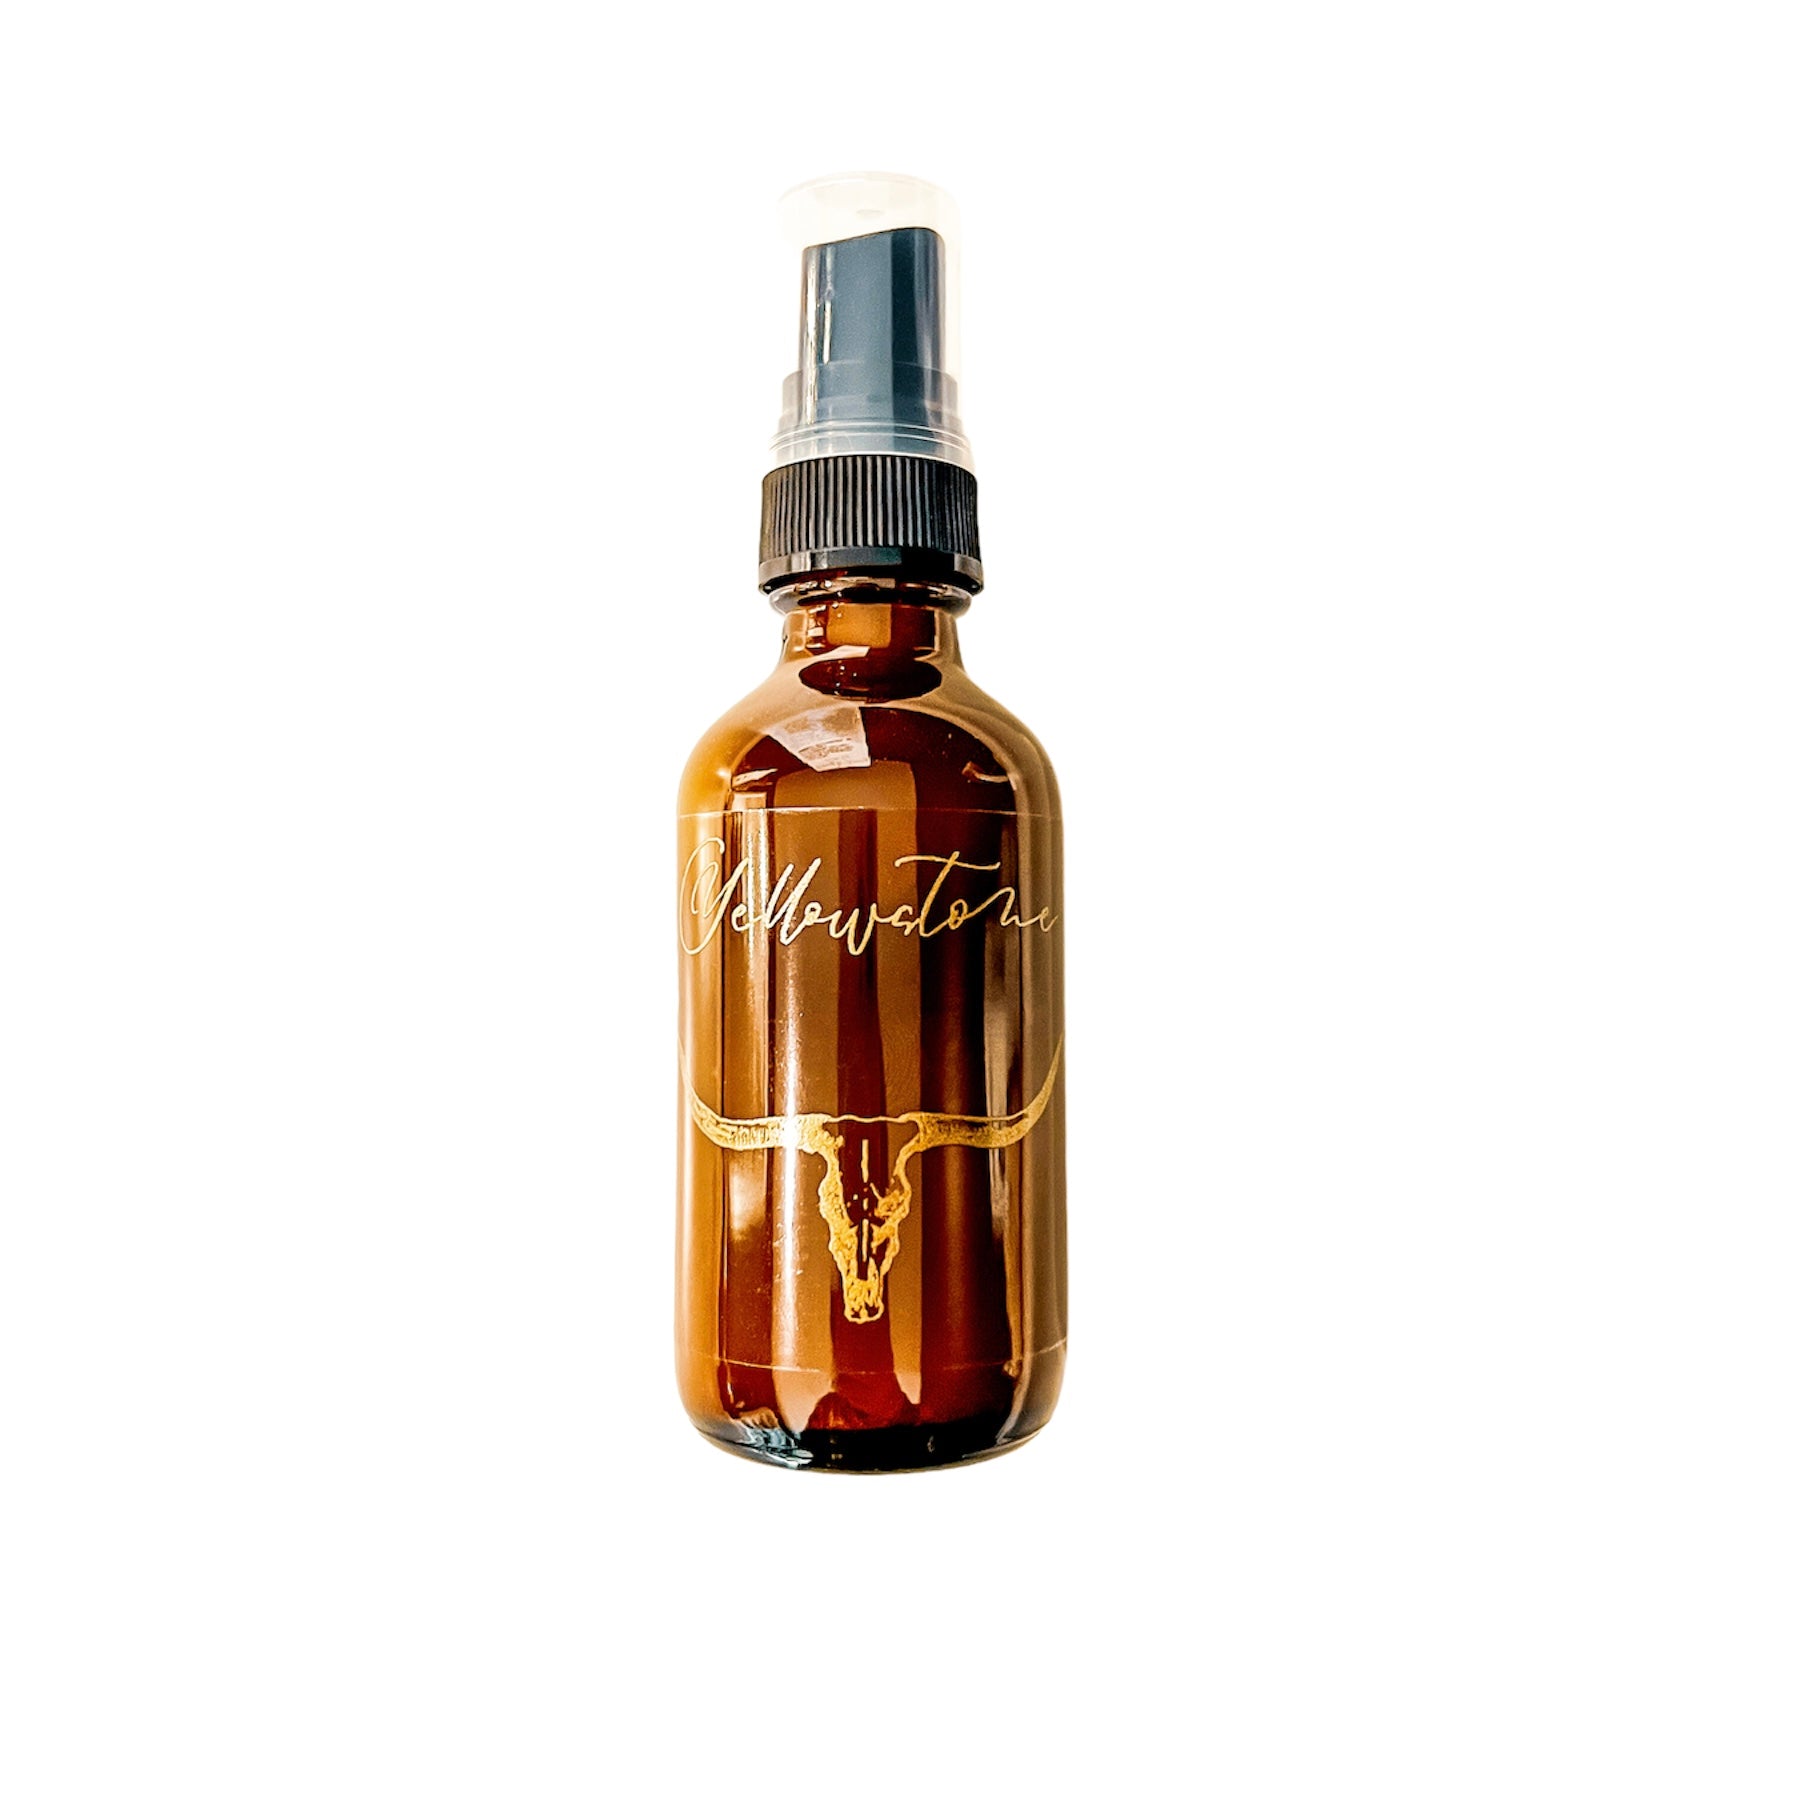 Amber, two fluid ounce, leather and bergamot scented fragrance spray labeled Yellowstone in gold letters